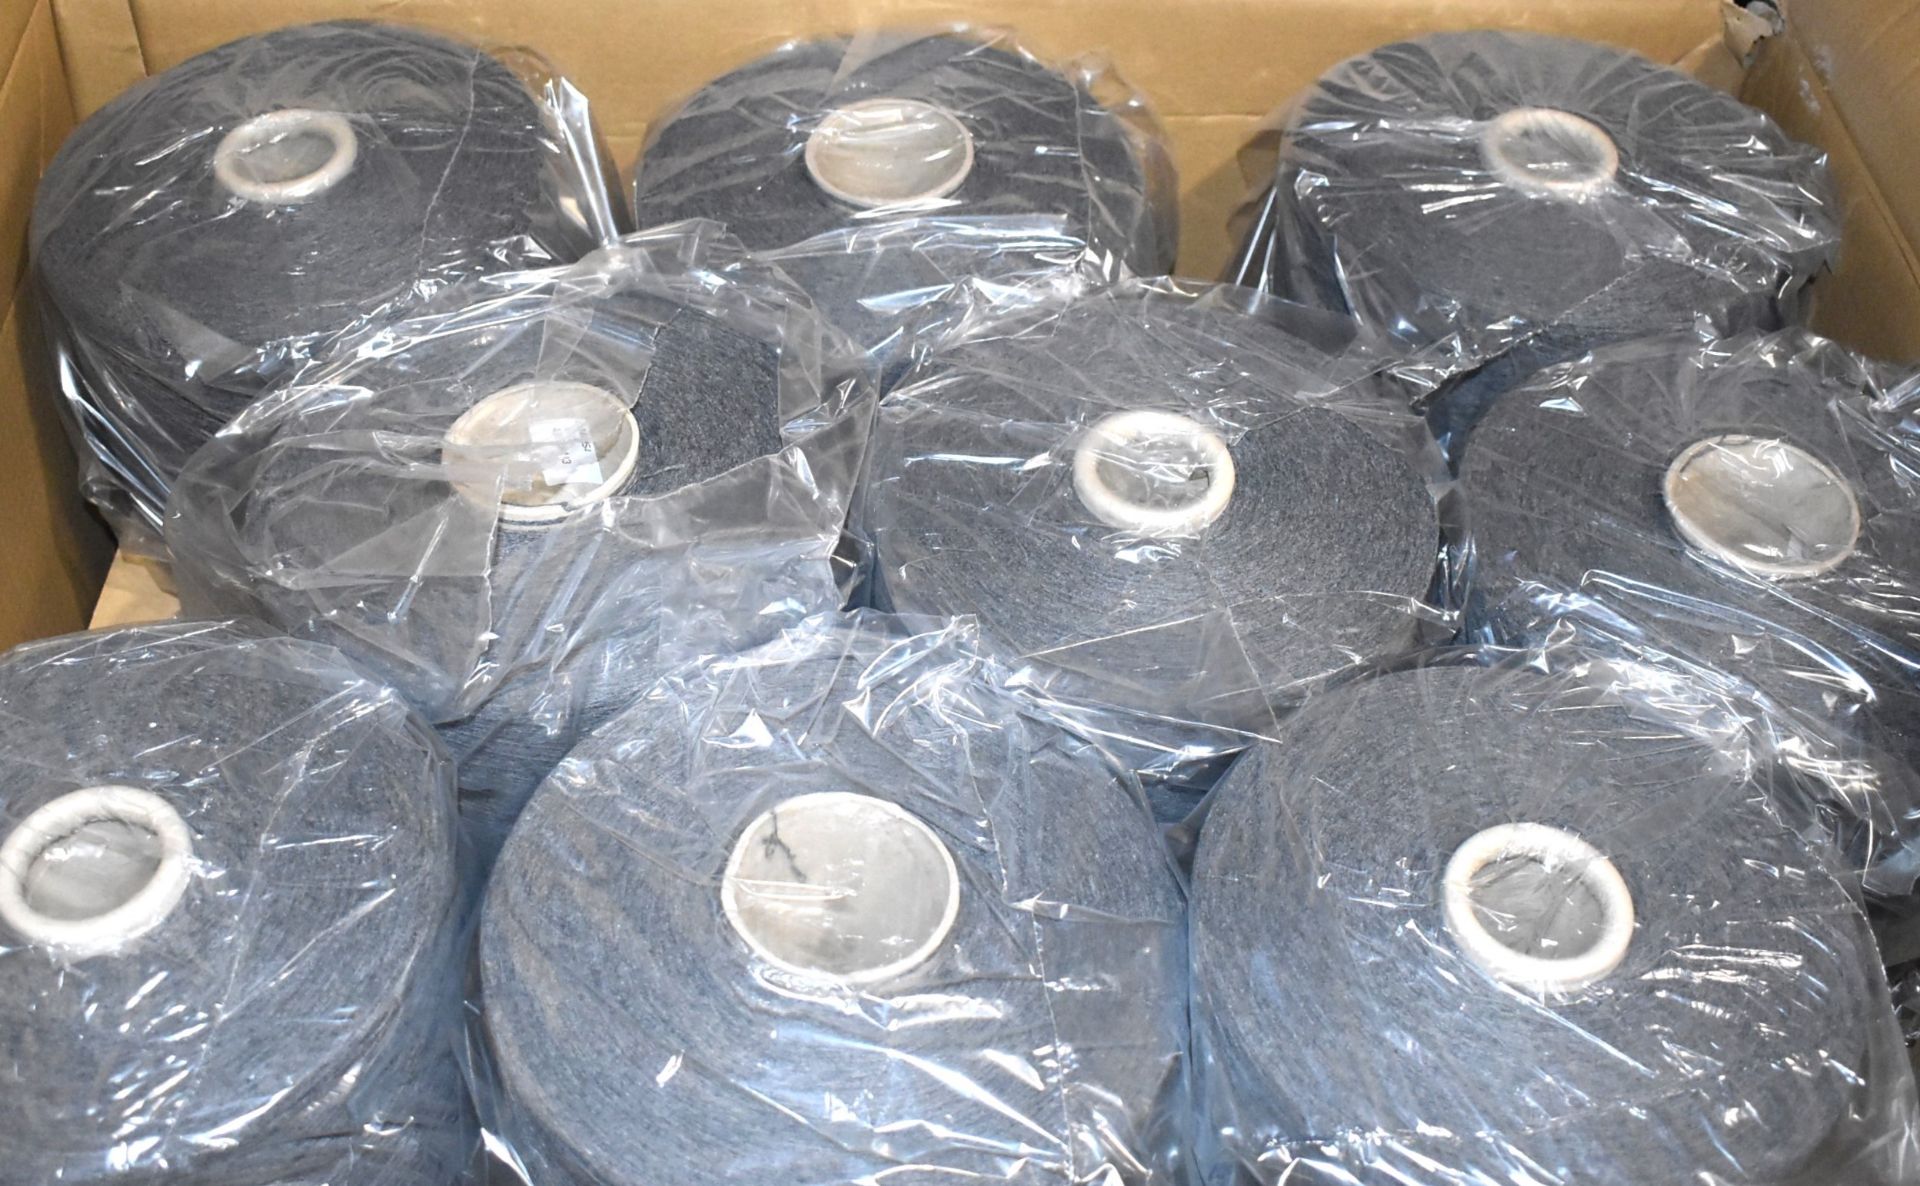 36 x Cones of 1/13 MicroCotton Knitting Yarn - Mid Grey - Approx Weight: 2,500g - New Stock ABL Yarn - Image 2 of 12